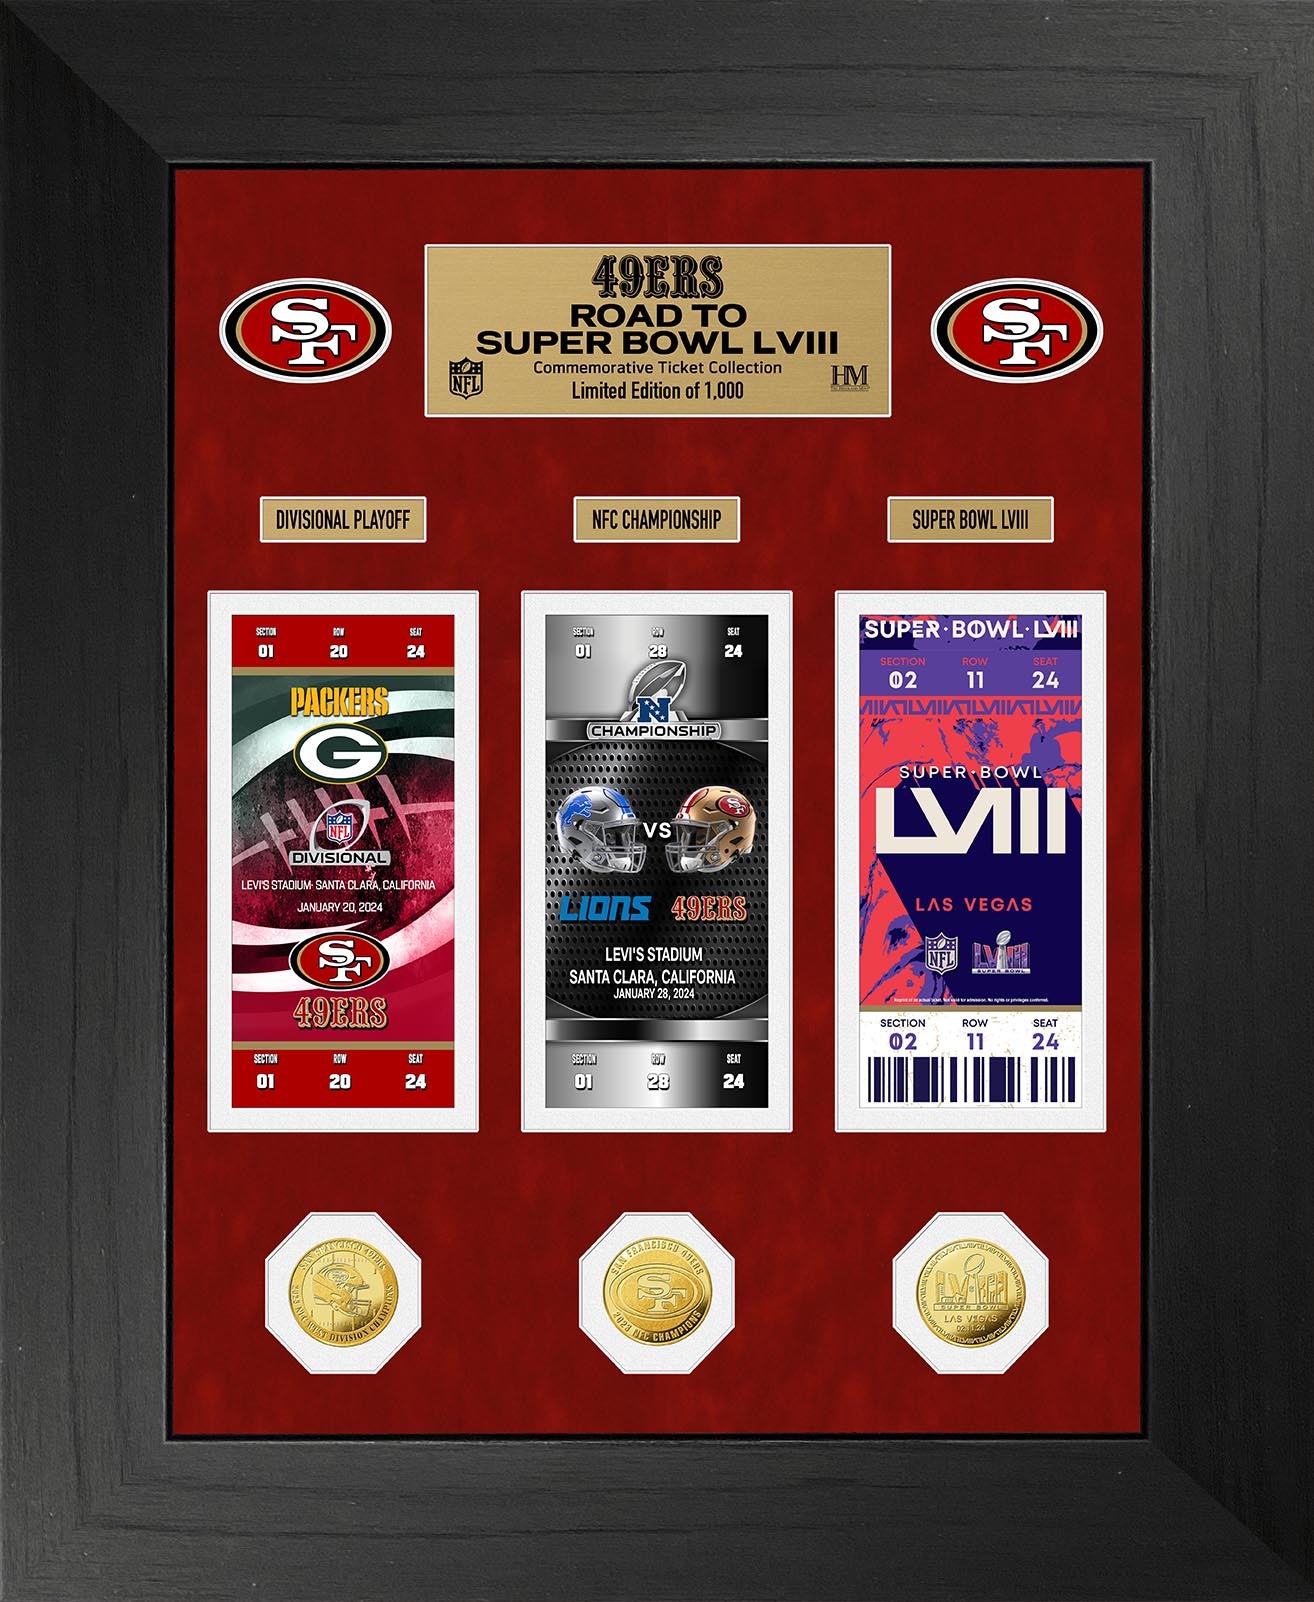 San Francisco 49ers Road to Super Bowl LVIII Deluxe Ticket and Gold Coin Photo Mint